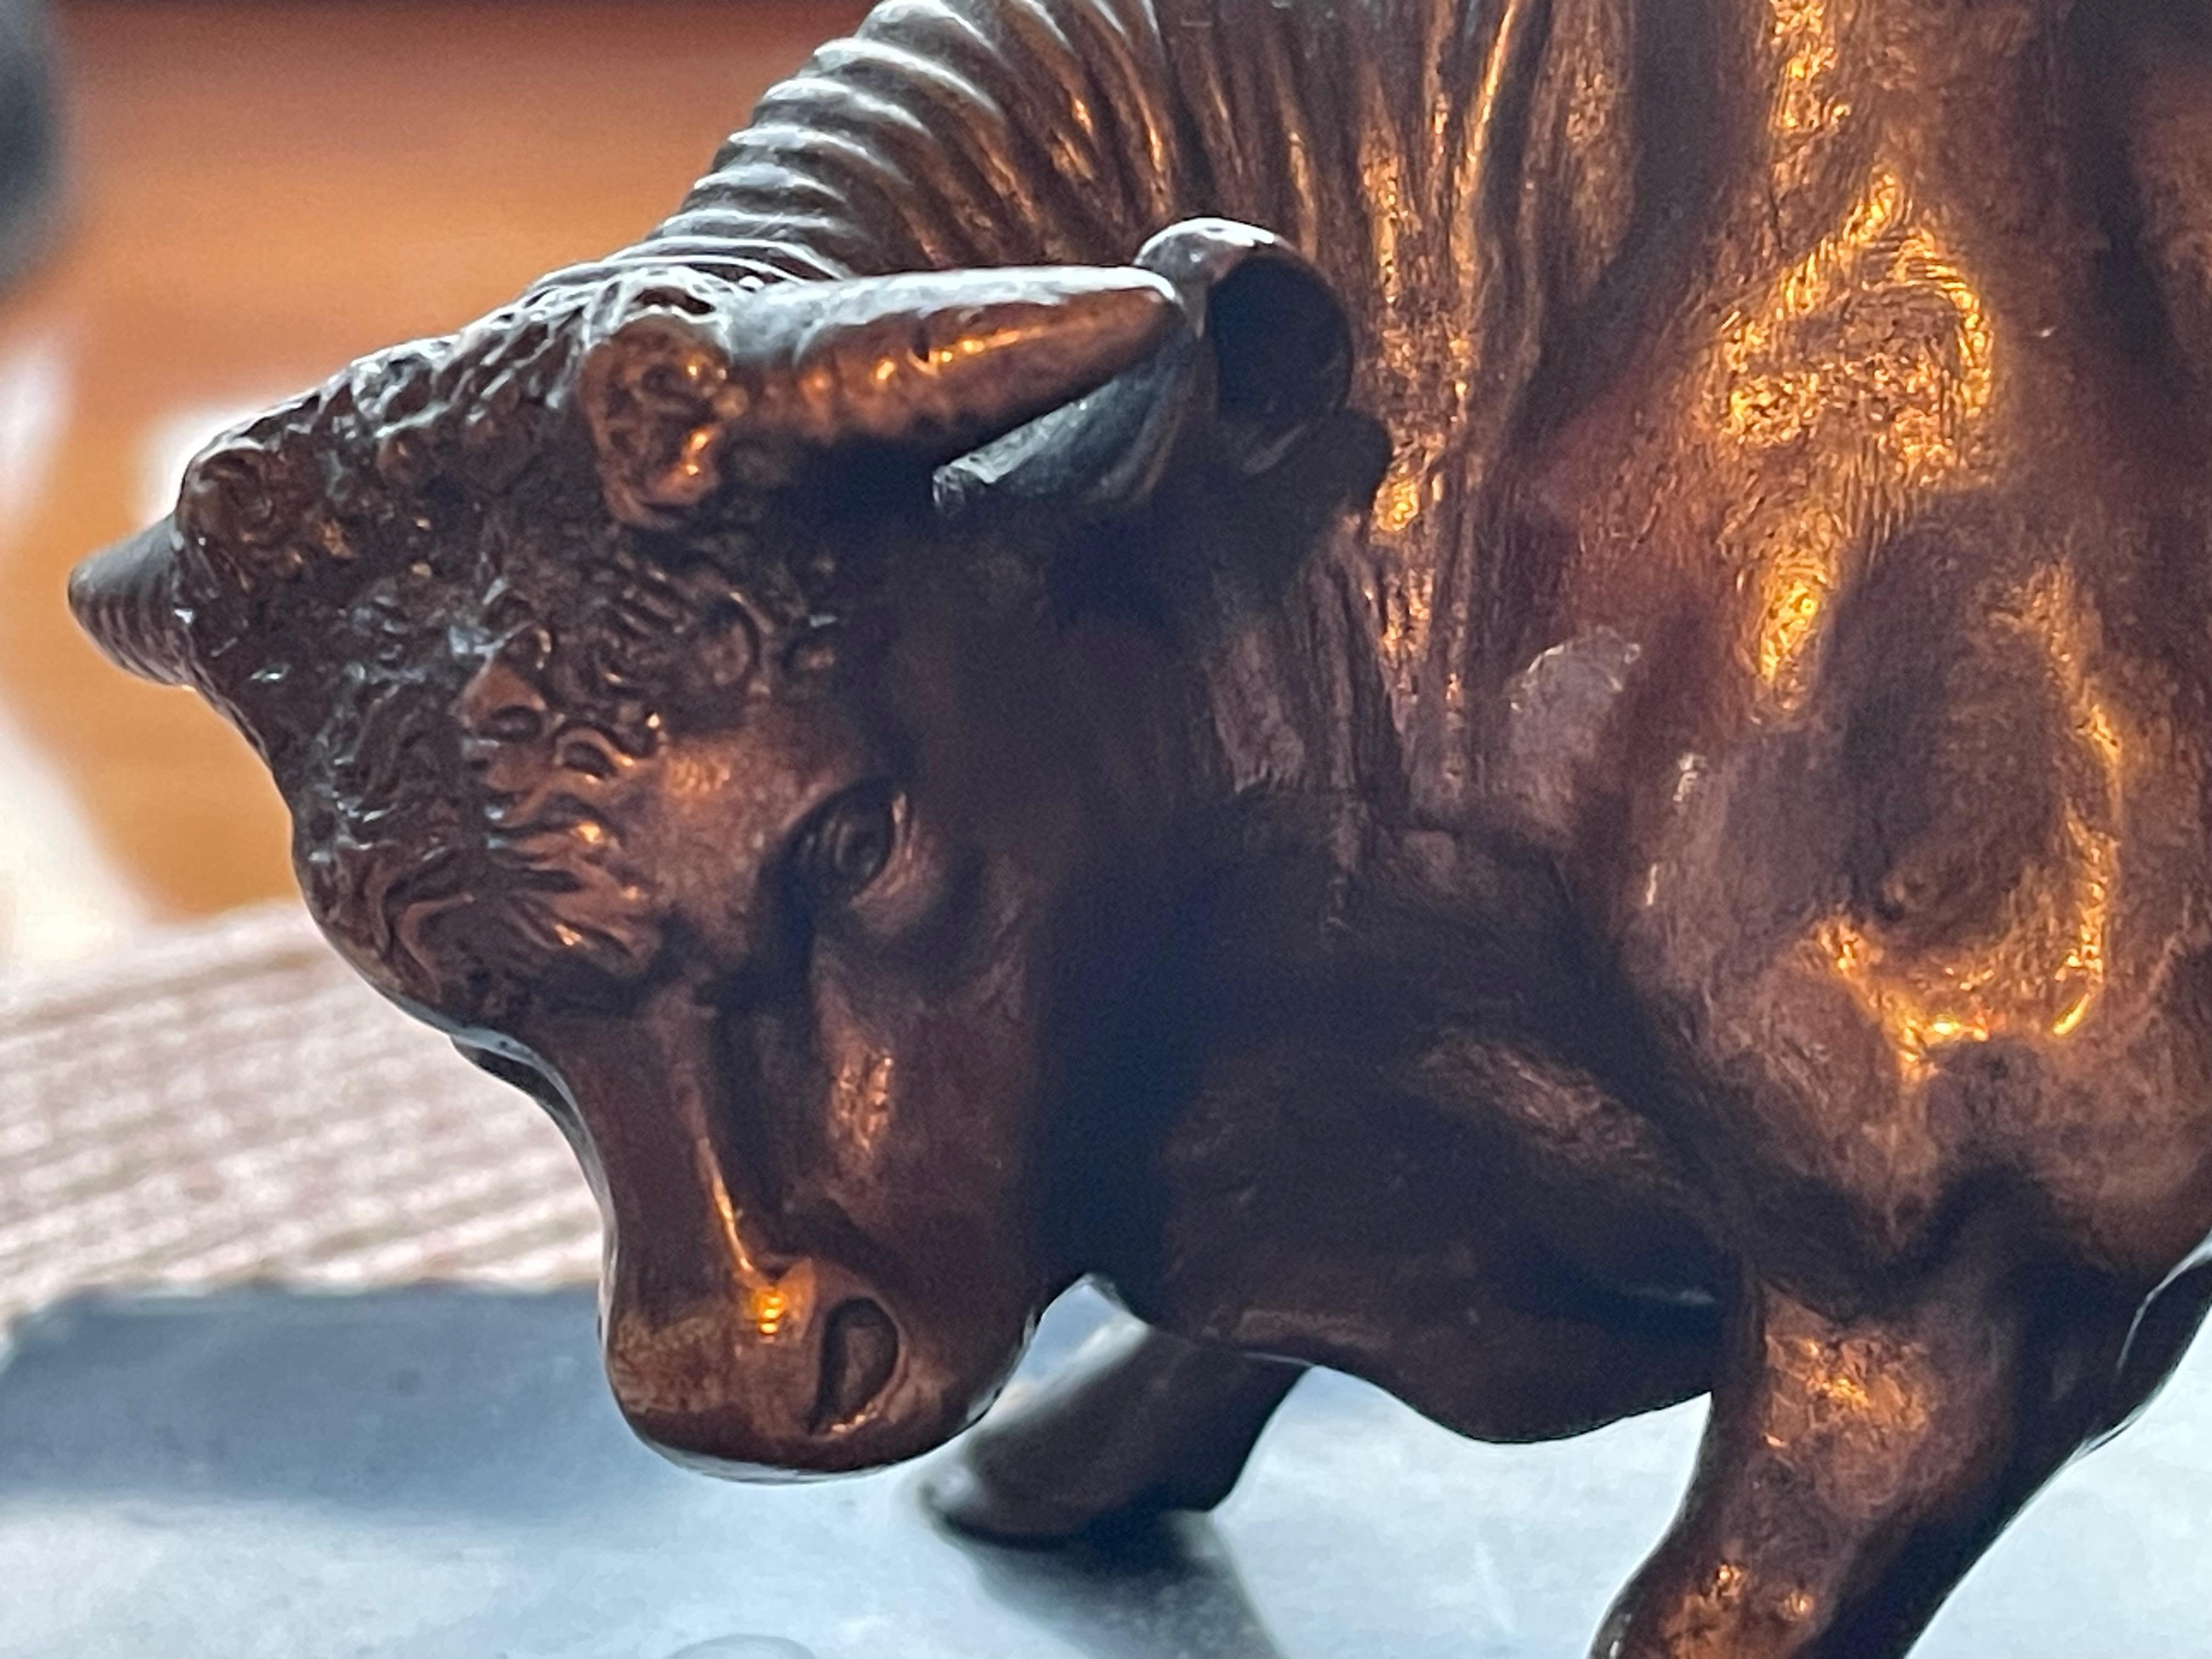 Fine Bronze of a small bull on a black belgian marble base.
The Original Bronze figure propably dates from the Art Nouveau or early Art Déco period in France.
These small bronzes were often used as decorative objects on writing desks.
The bull is